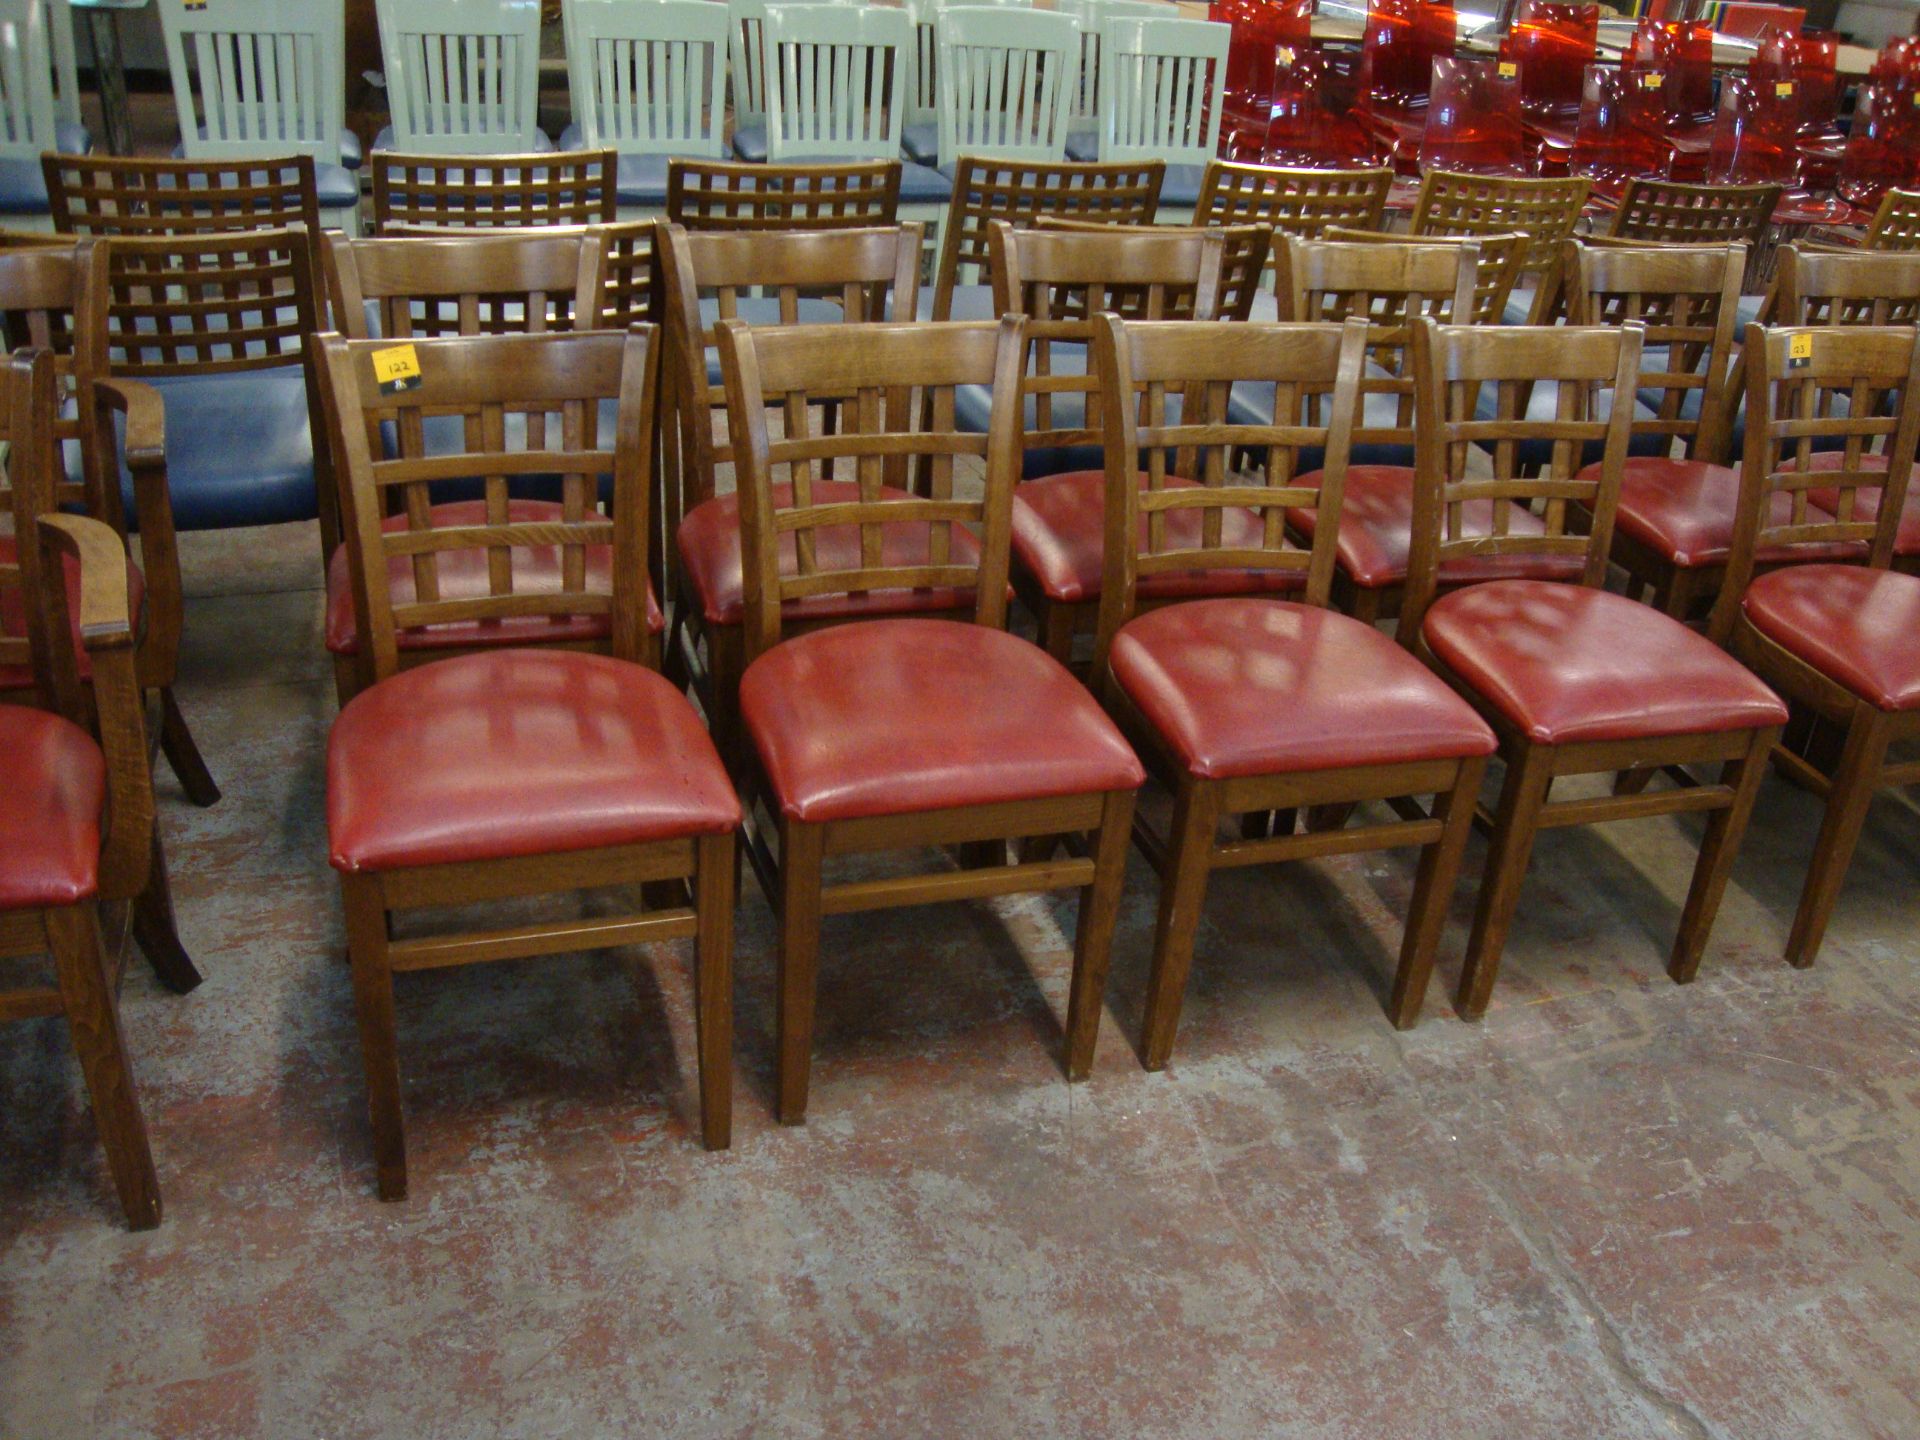 8 off wooden chairs with red upholstered bases. NB lots 121 – 129 consist of different quantities of